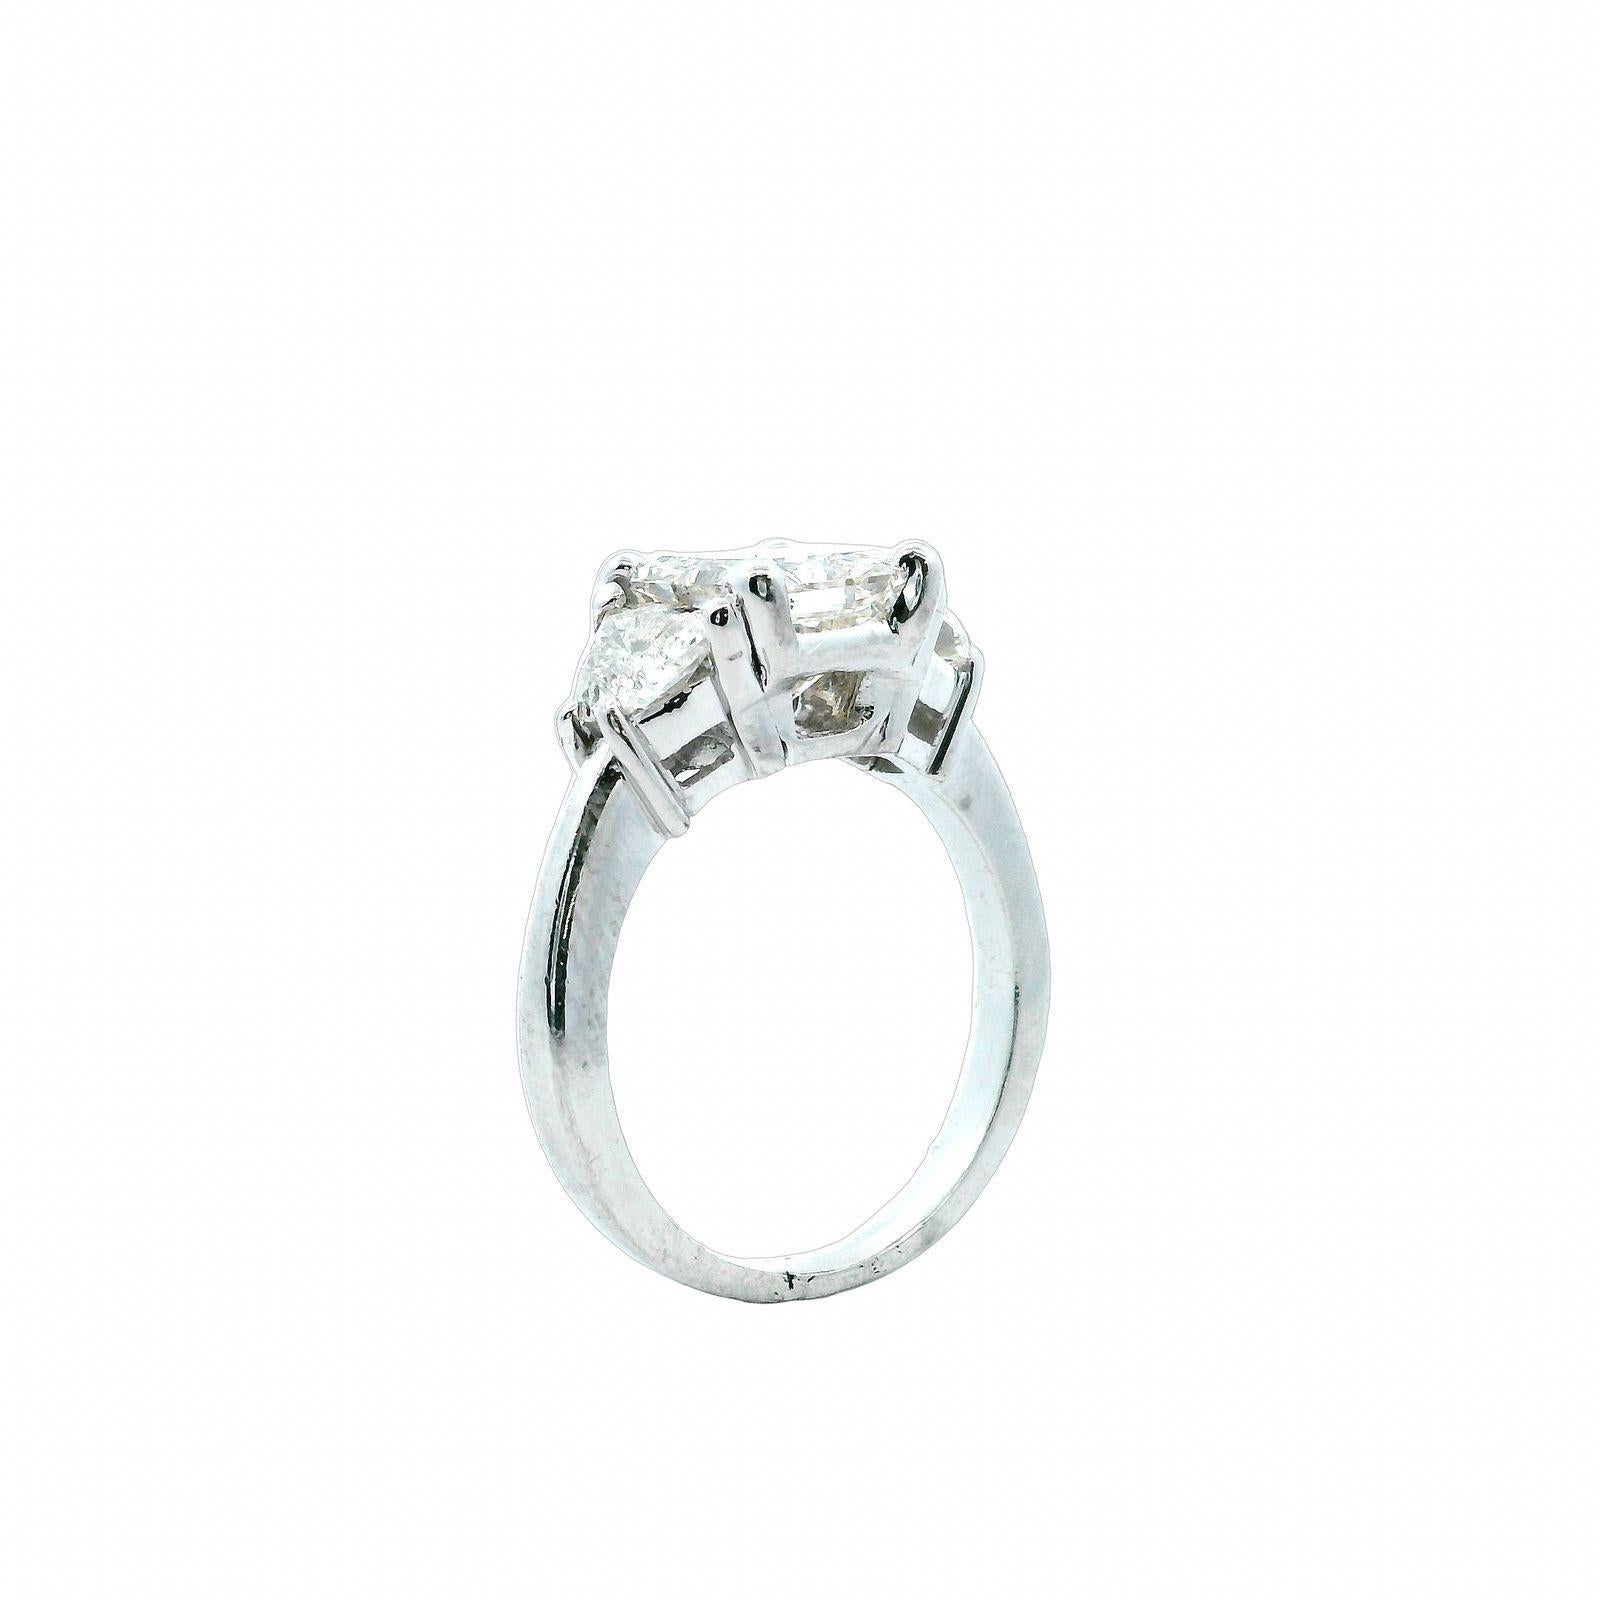 2.58 Square Radiant Diamond Modern Engagement Ring GIA Certified In Excellent Condition For Sale In Boca Raton, FL